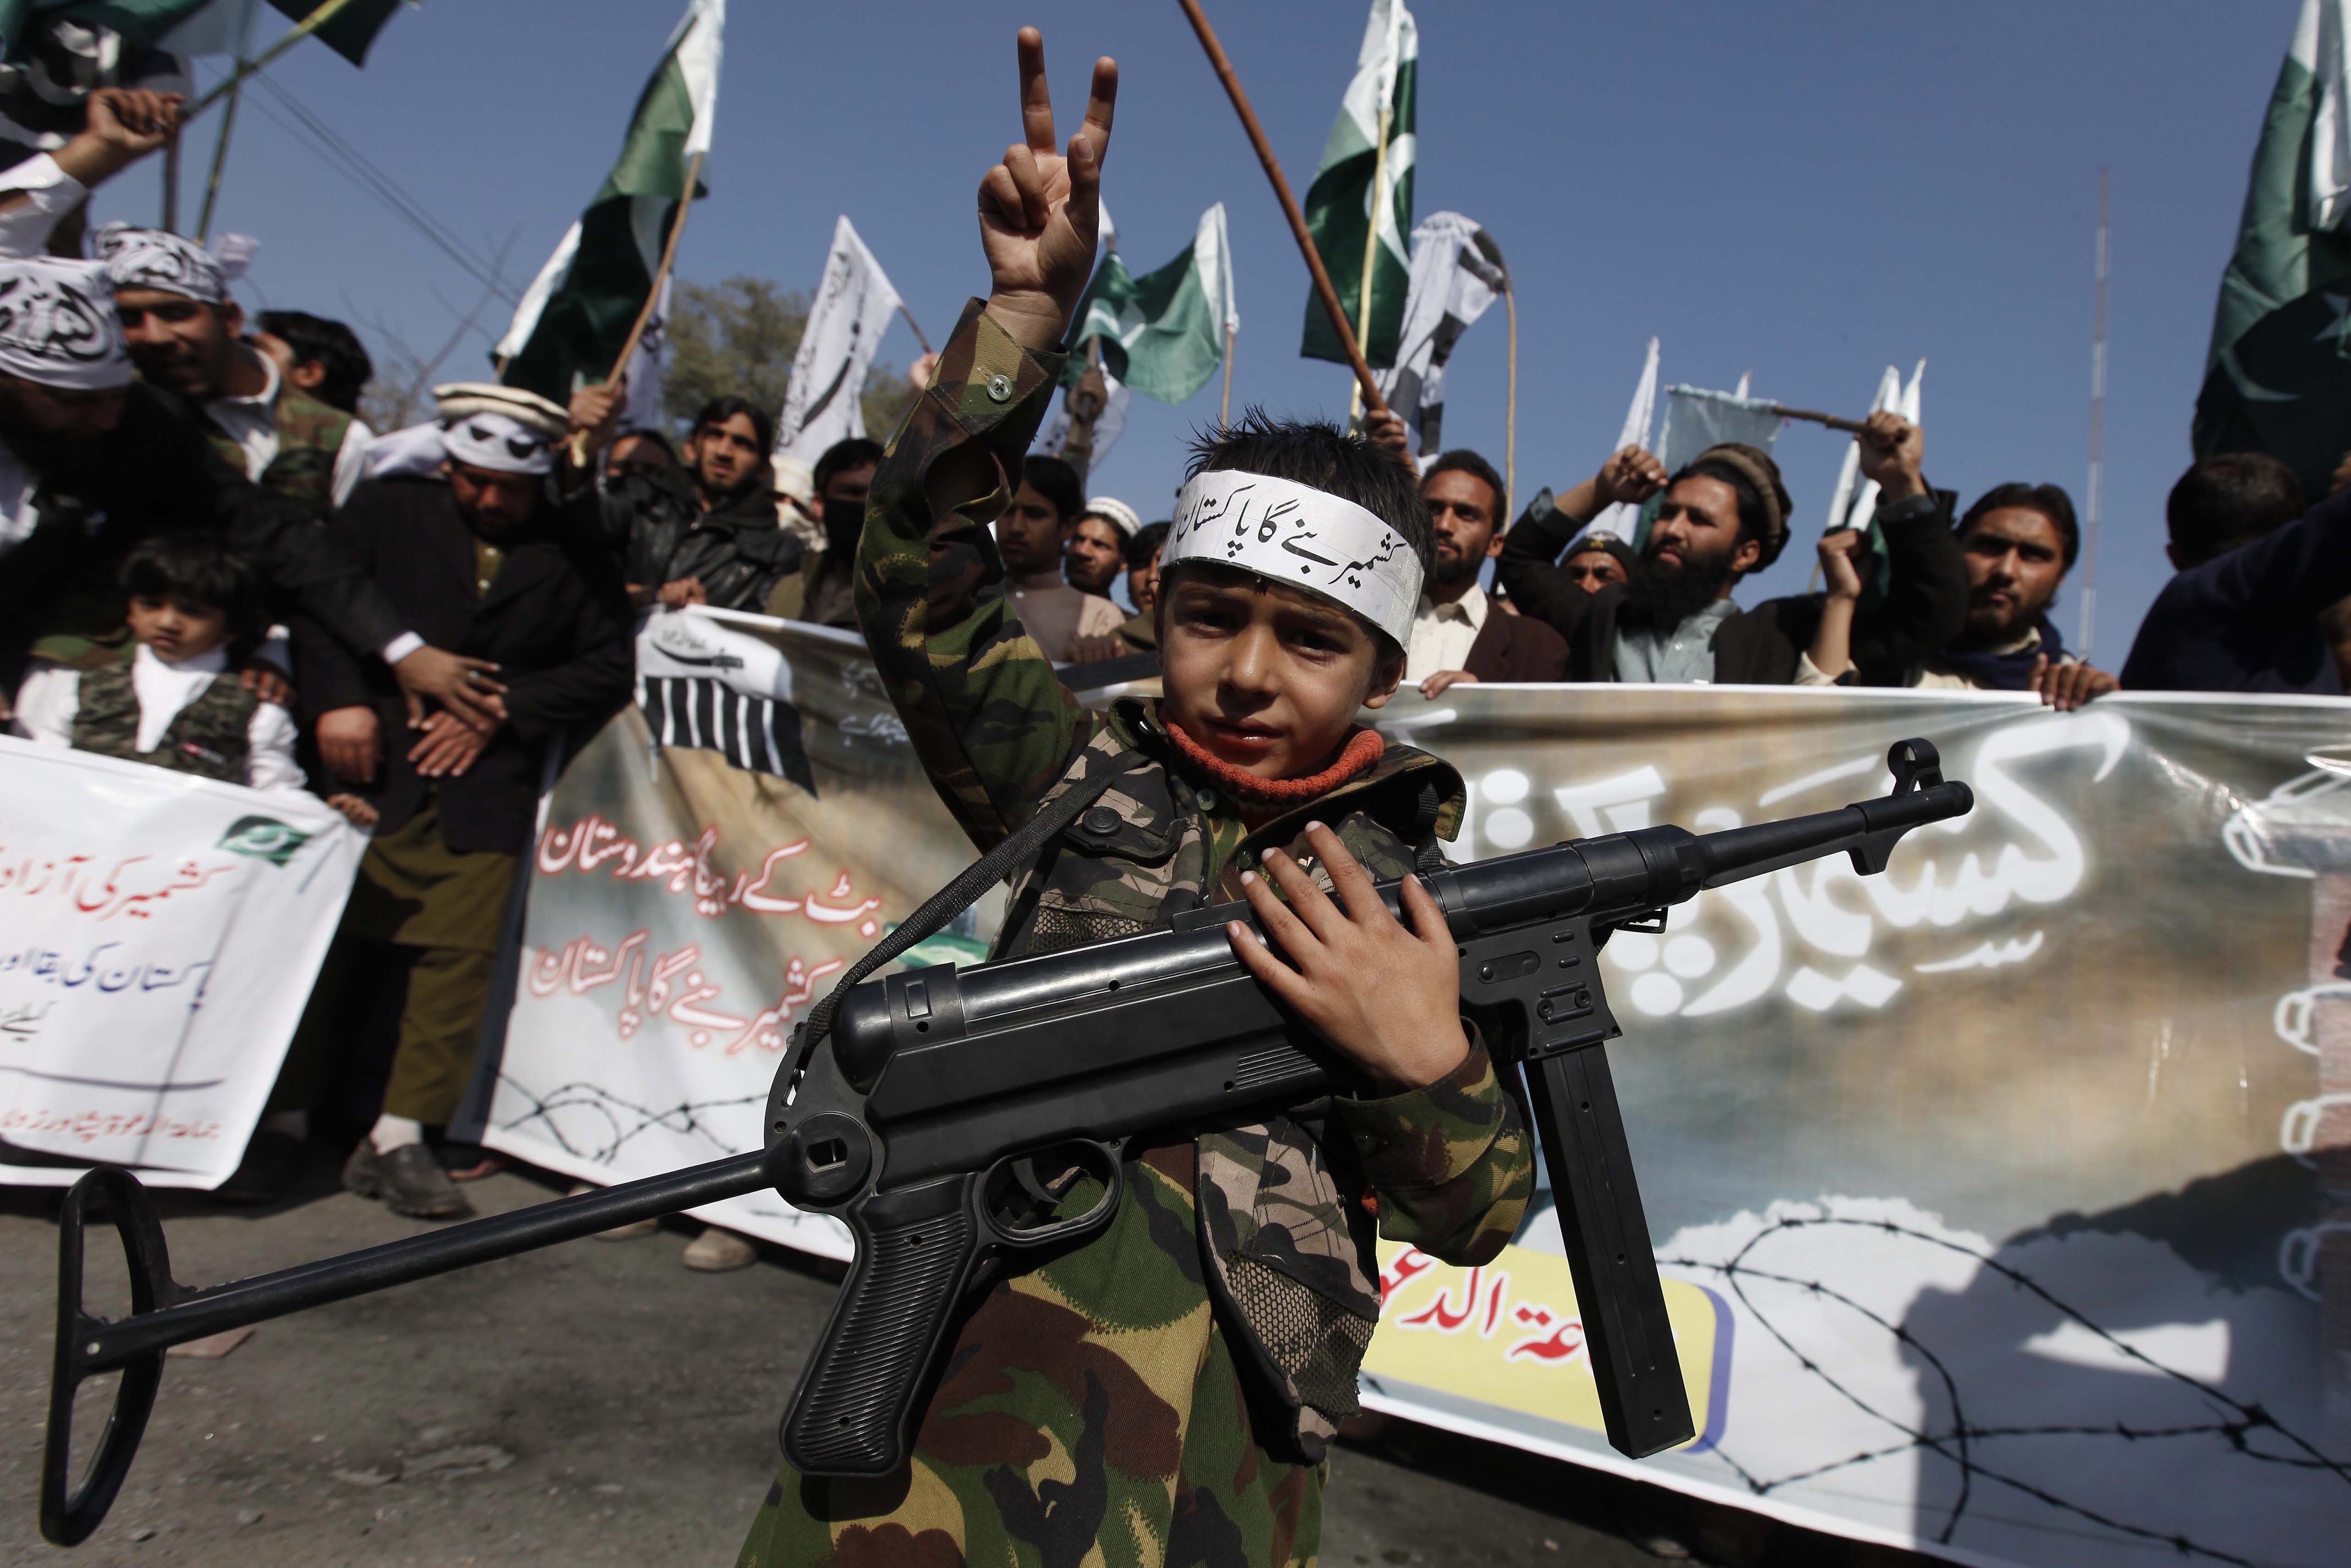 epa05144283 A boy holds a weapon as supporters of the banned Pakistan-based charity Jamaat-ud-Dawa (JuD), attend a rally expressing support for Kashmiris lving in Indian Kashmir, in Peshawar, Pakistan, 05 February 2016. Demonstrators demanded an end to Indian rule in the region and a settlement of the dispute according to wishes of Kashmiris and UN resolutions. EPA/ARSHAD ARBAB